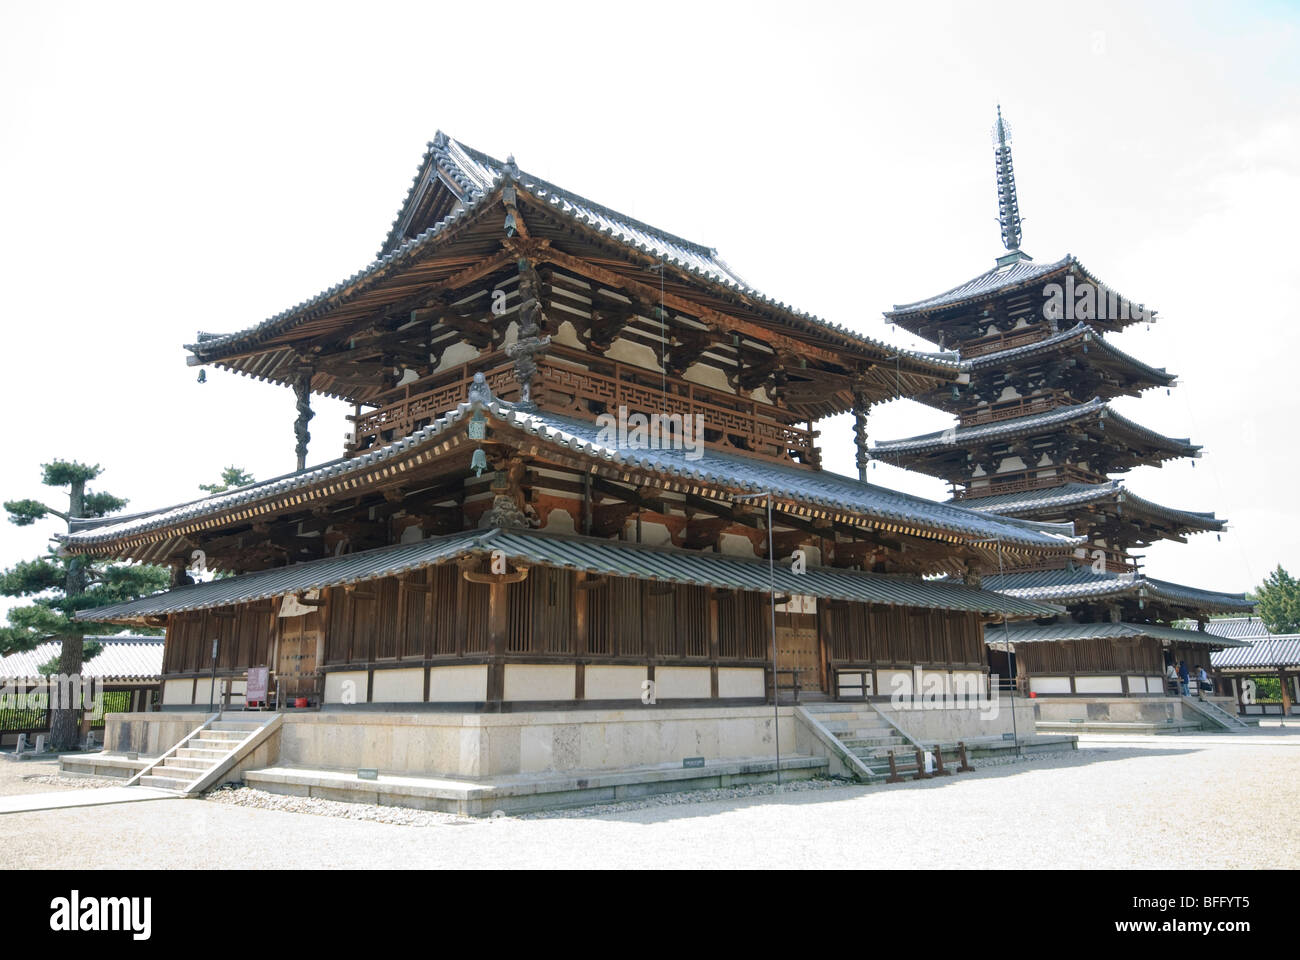 Kondo (main hall) and 5-storey pagoda of Horyu-ji, one of the oldest and most famous temples in Japan. Stock Photo